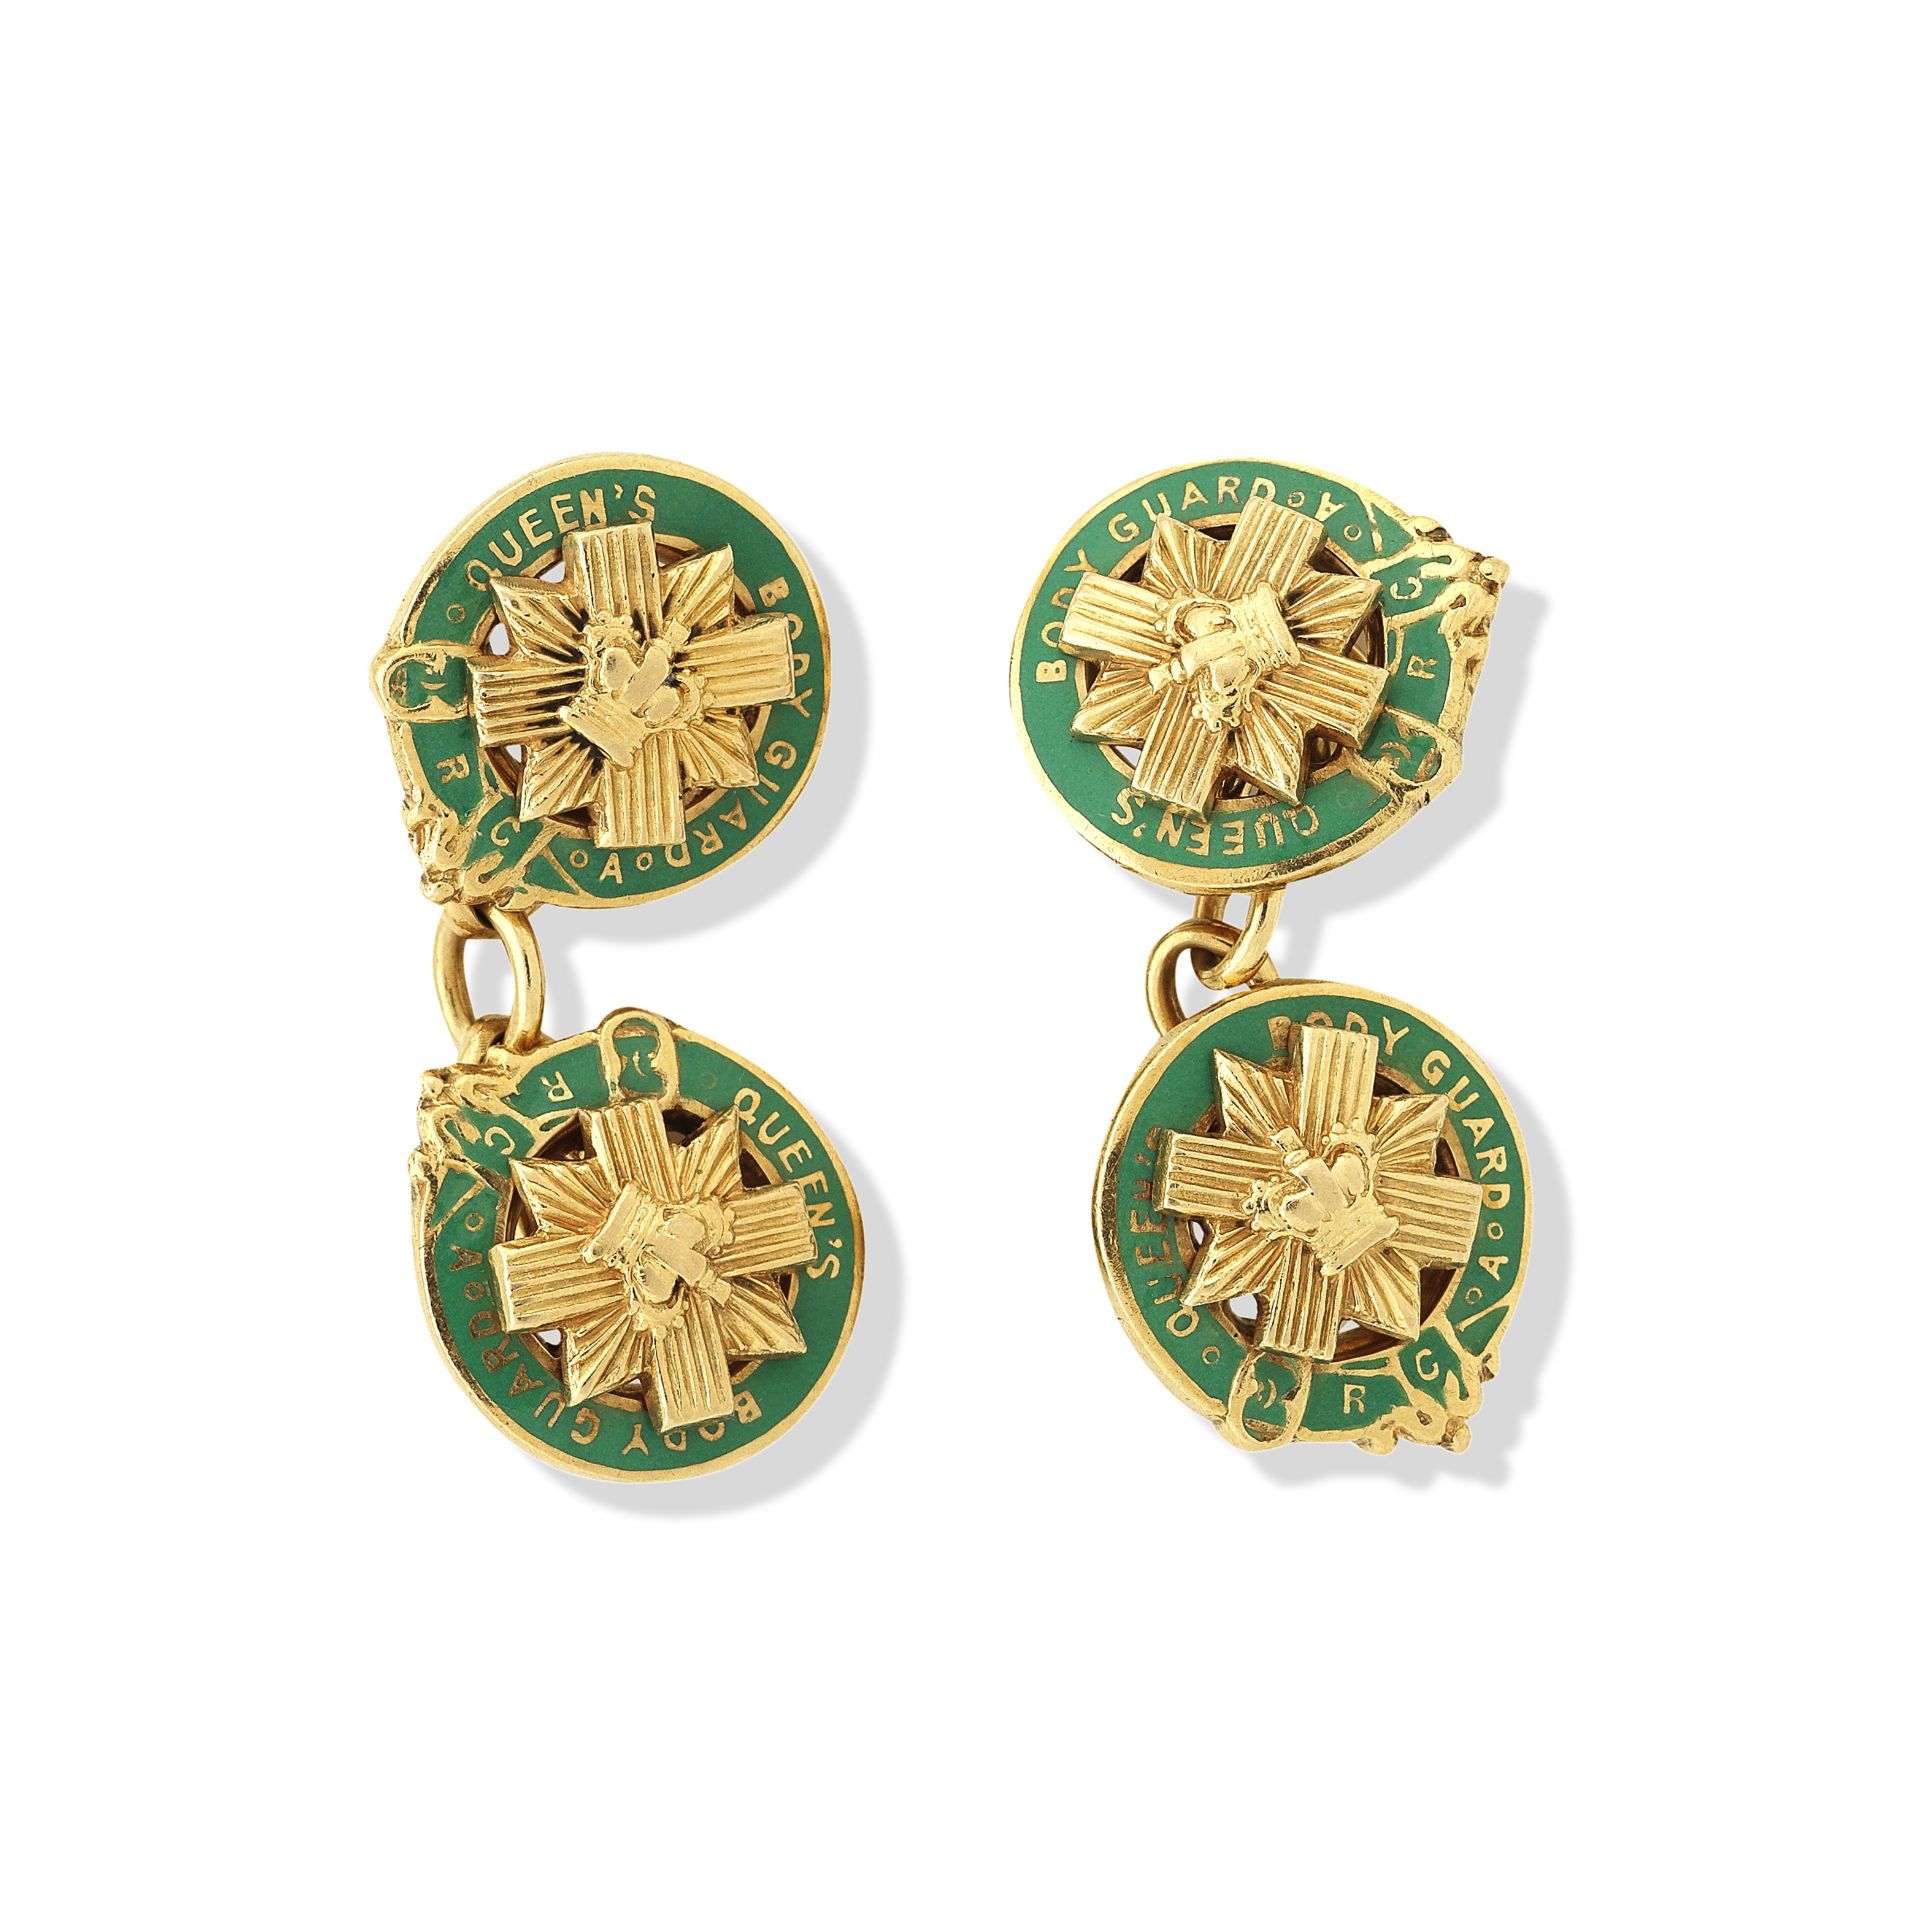 A pair of Royal Company of Archers cufflinks